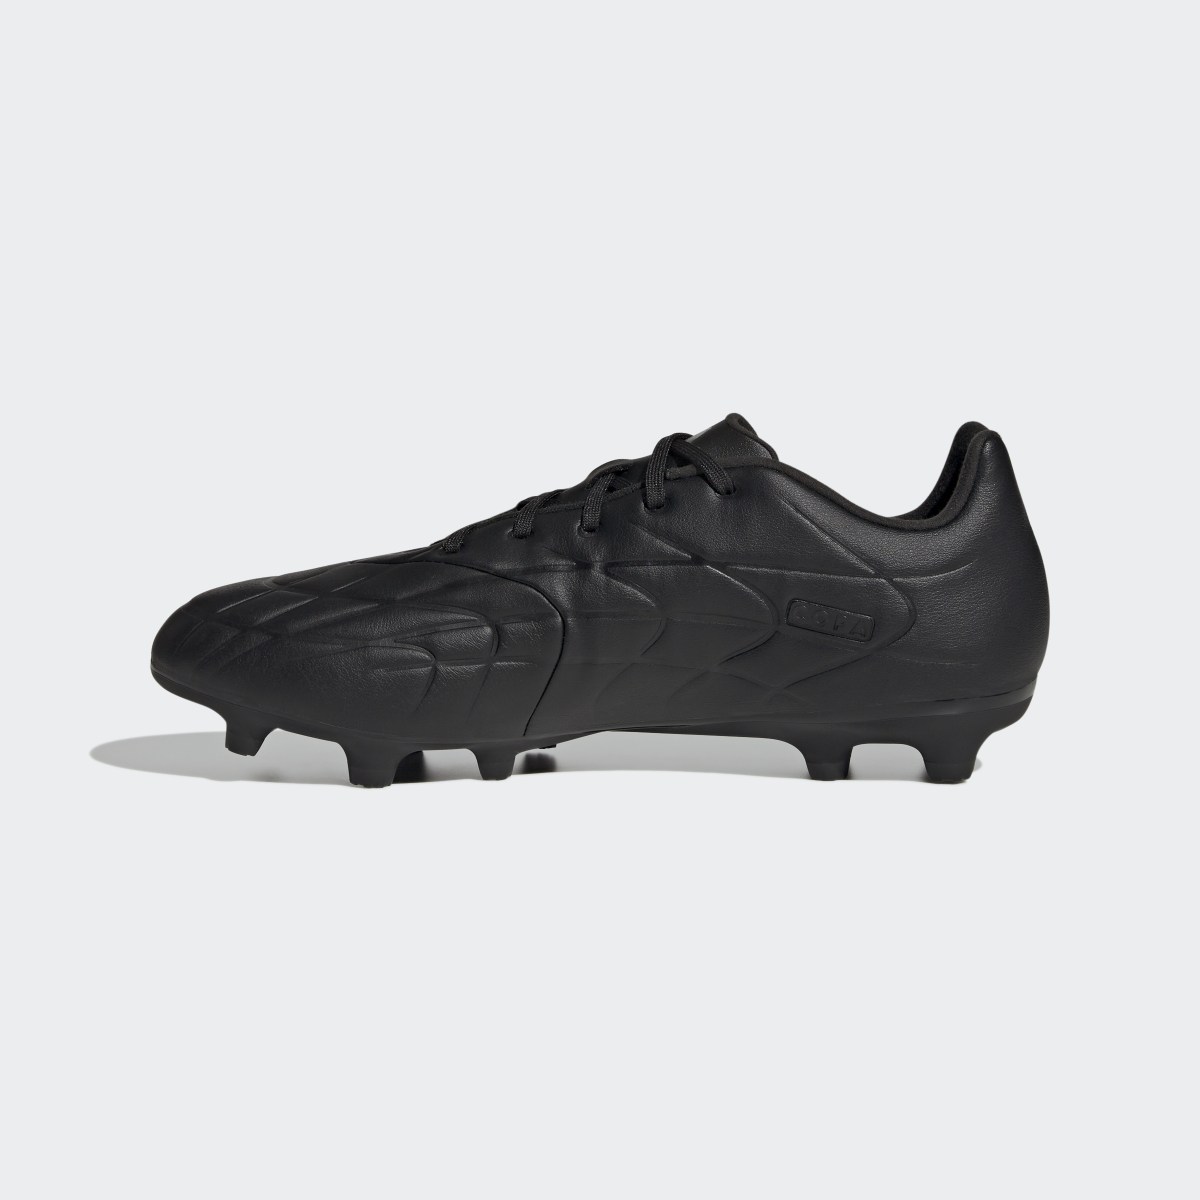 Adidas Copa Pure.3 Firm Ground Cleats. 7